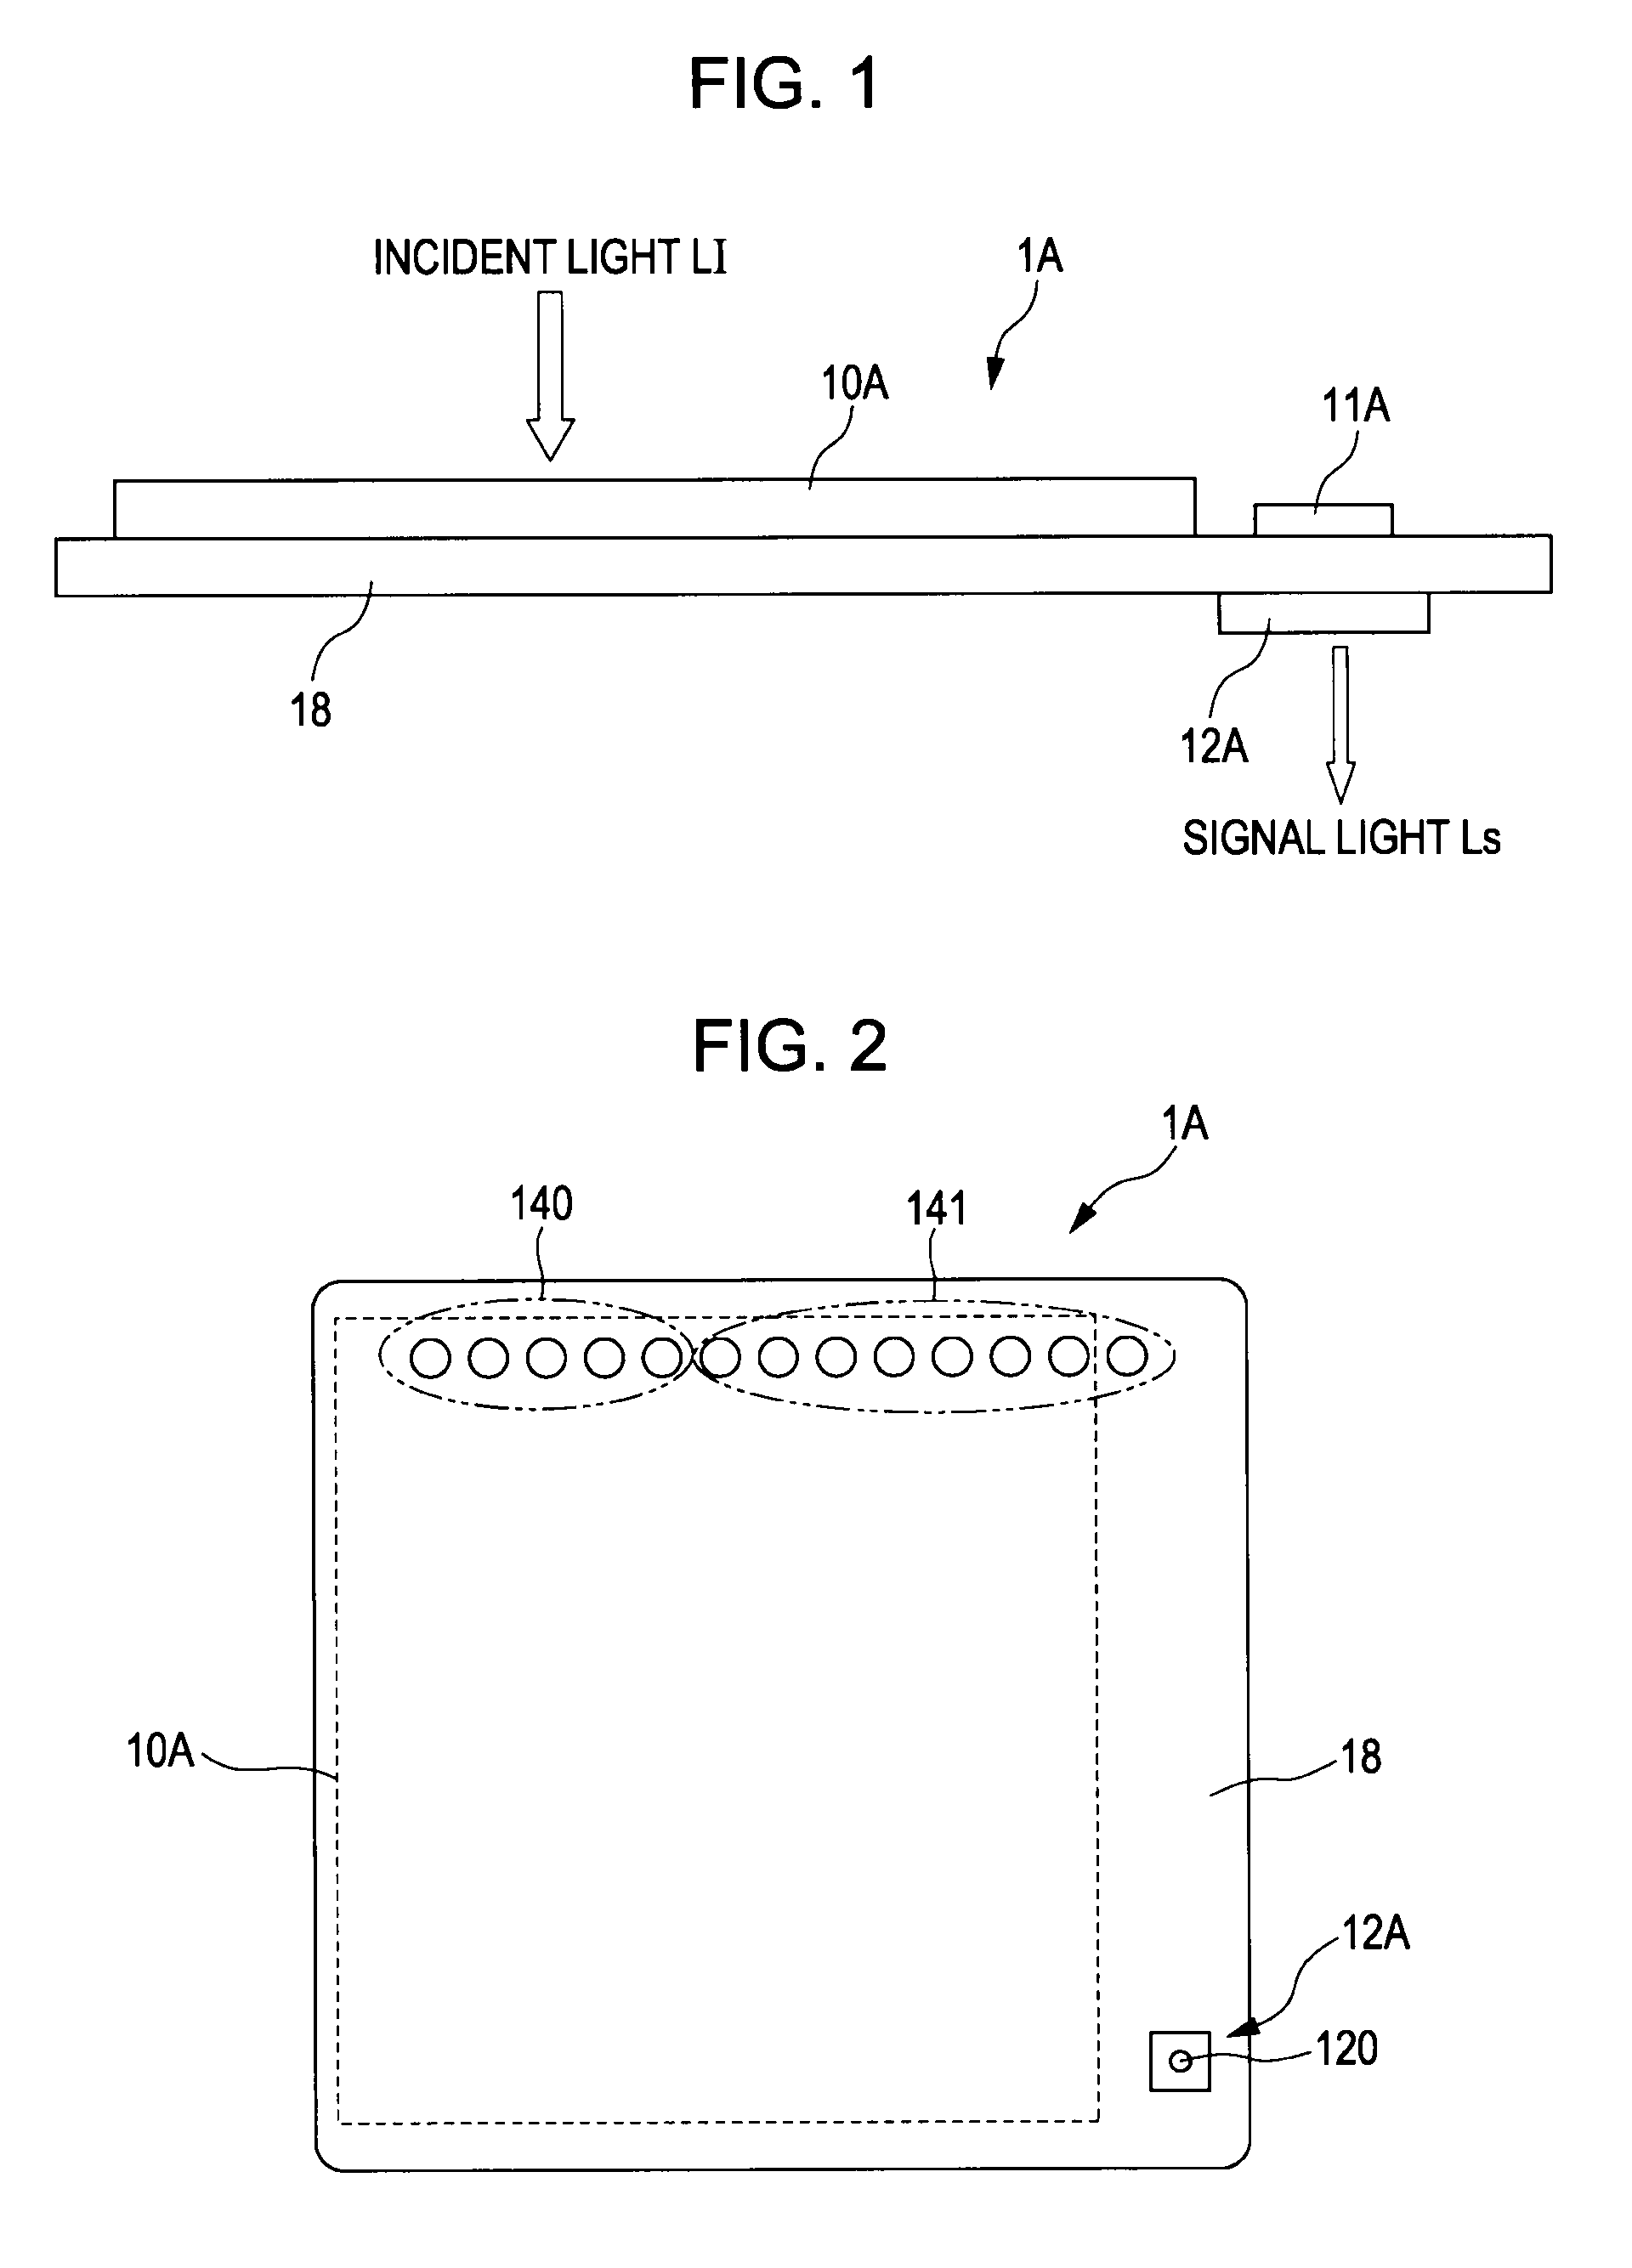 Solid-state imager and signal processing system